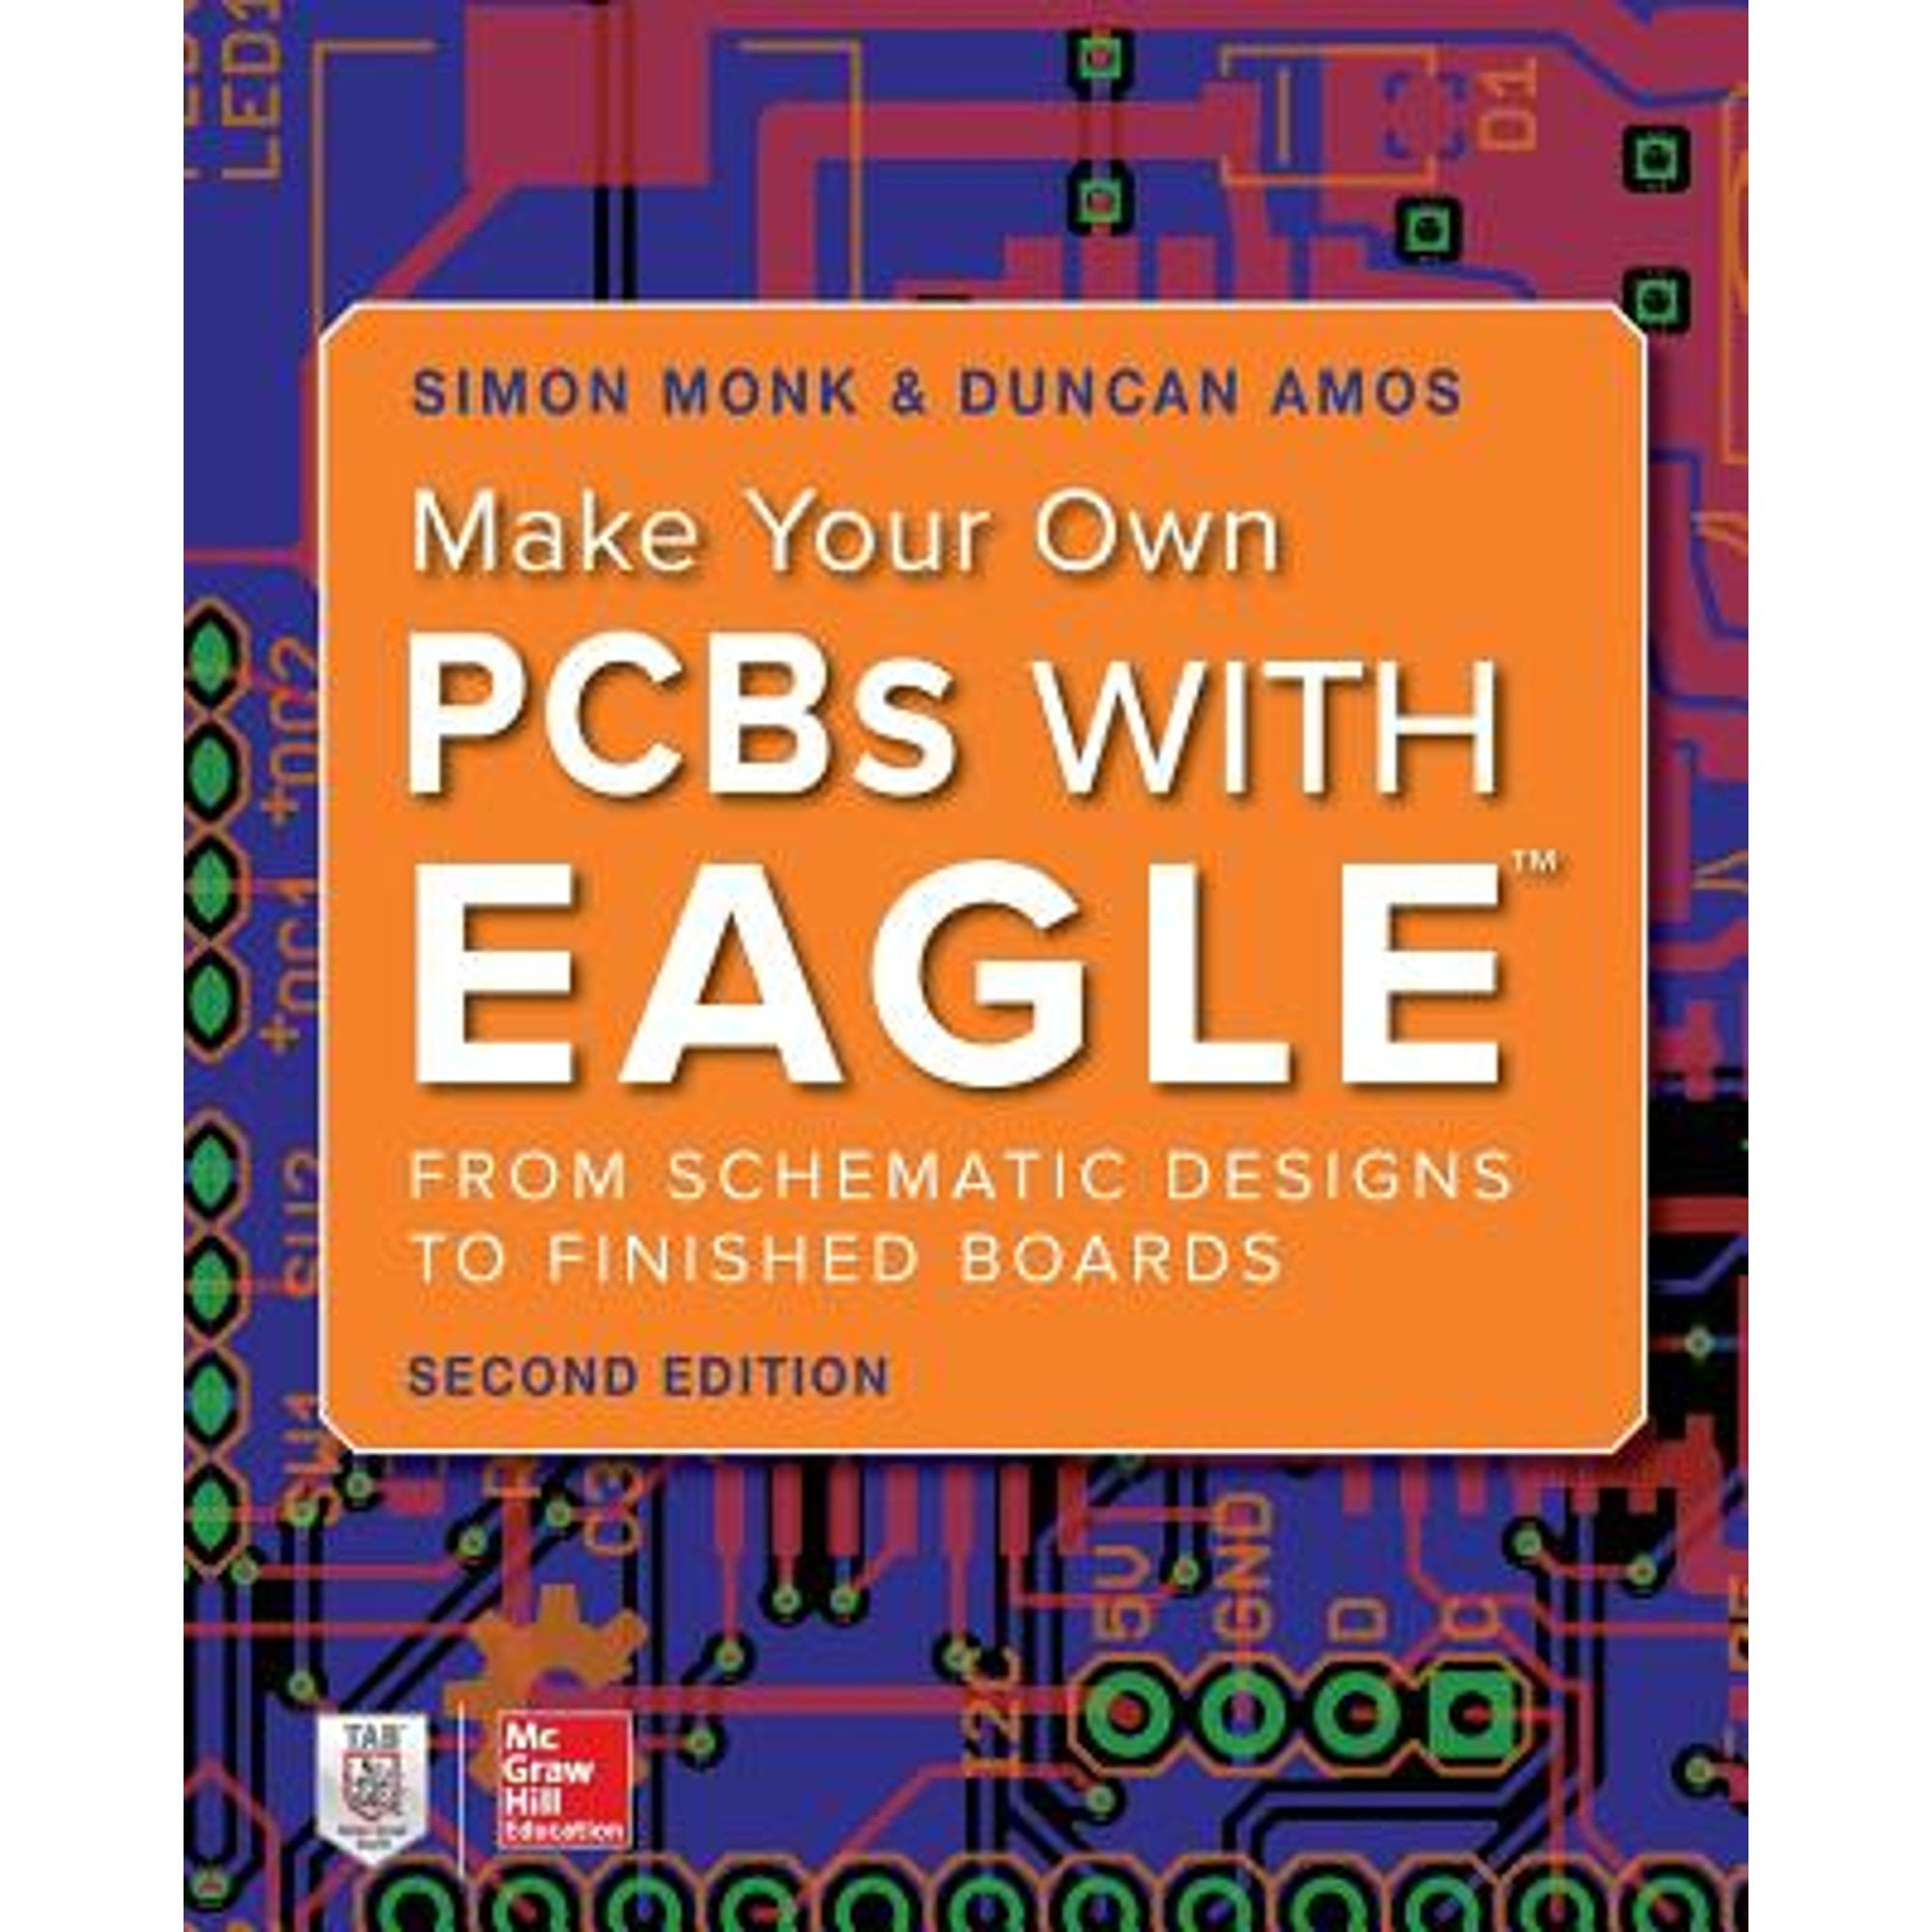 Pre-Owned Make Your Own PCBs with Eagle: From Schematic Designs to Finished Boards (Paperback) by Simon Monk, Duncan Amos